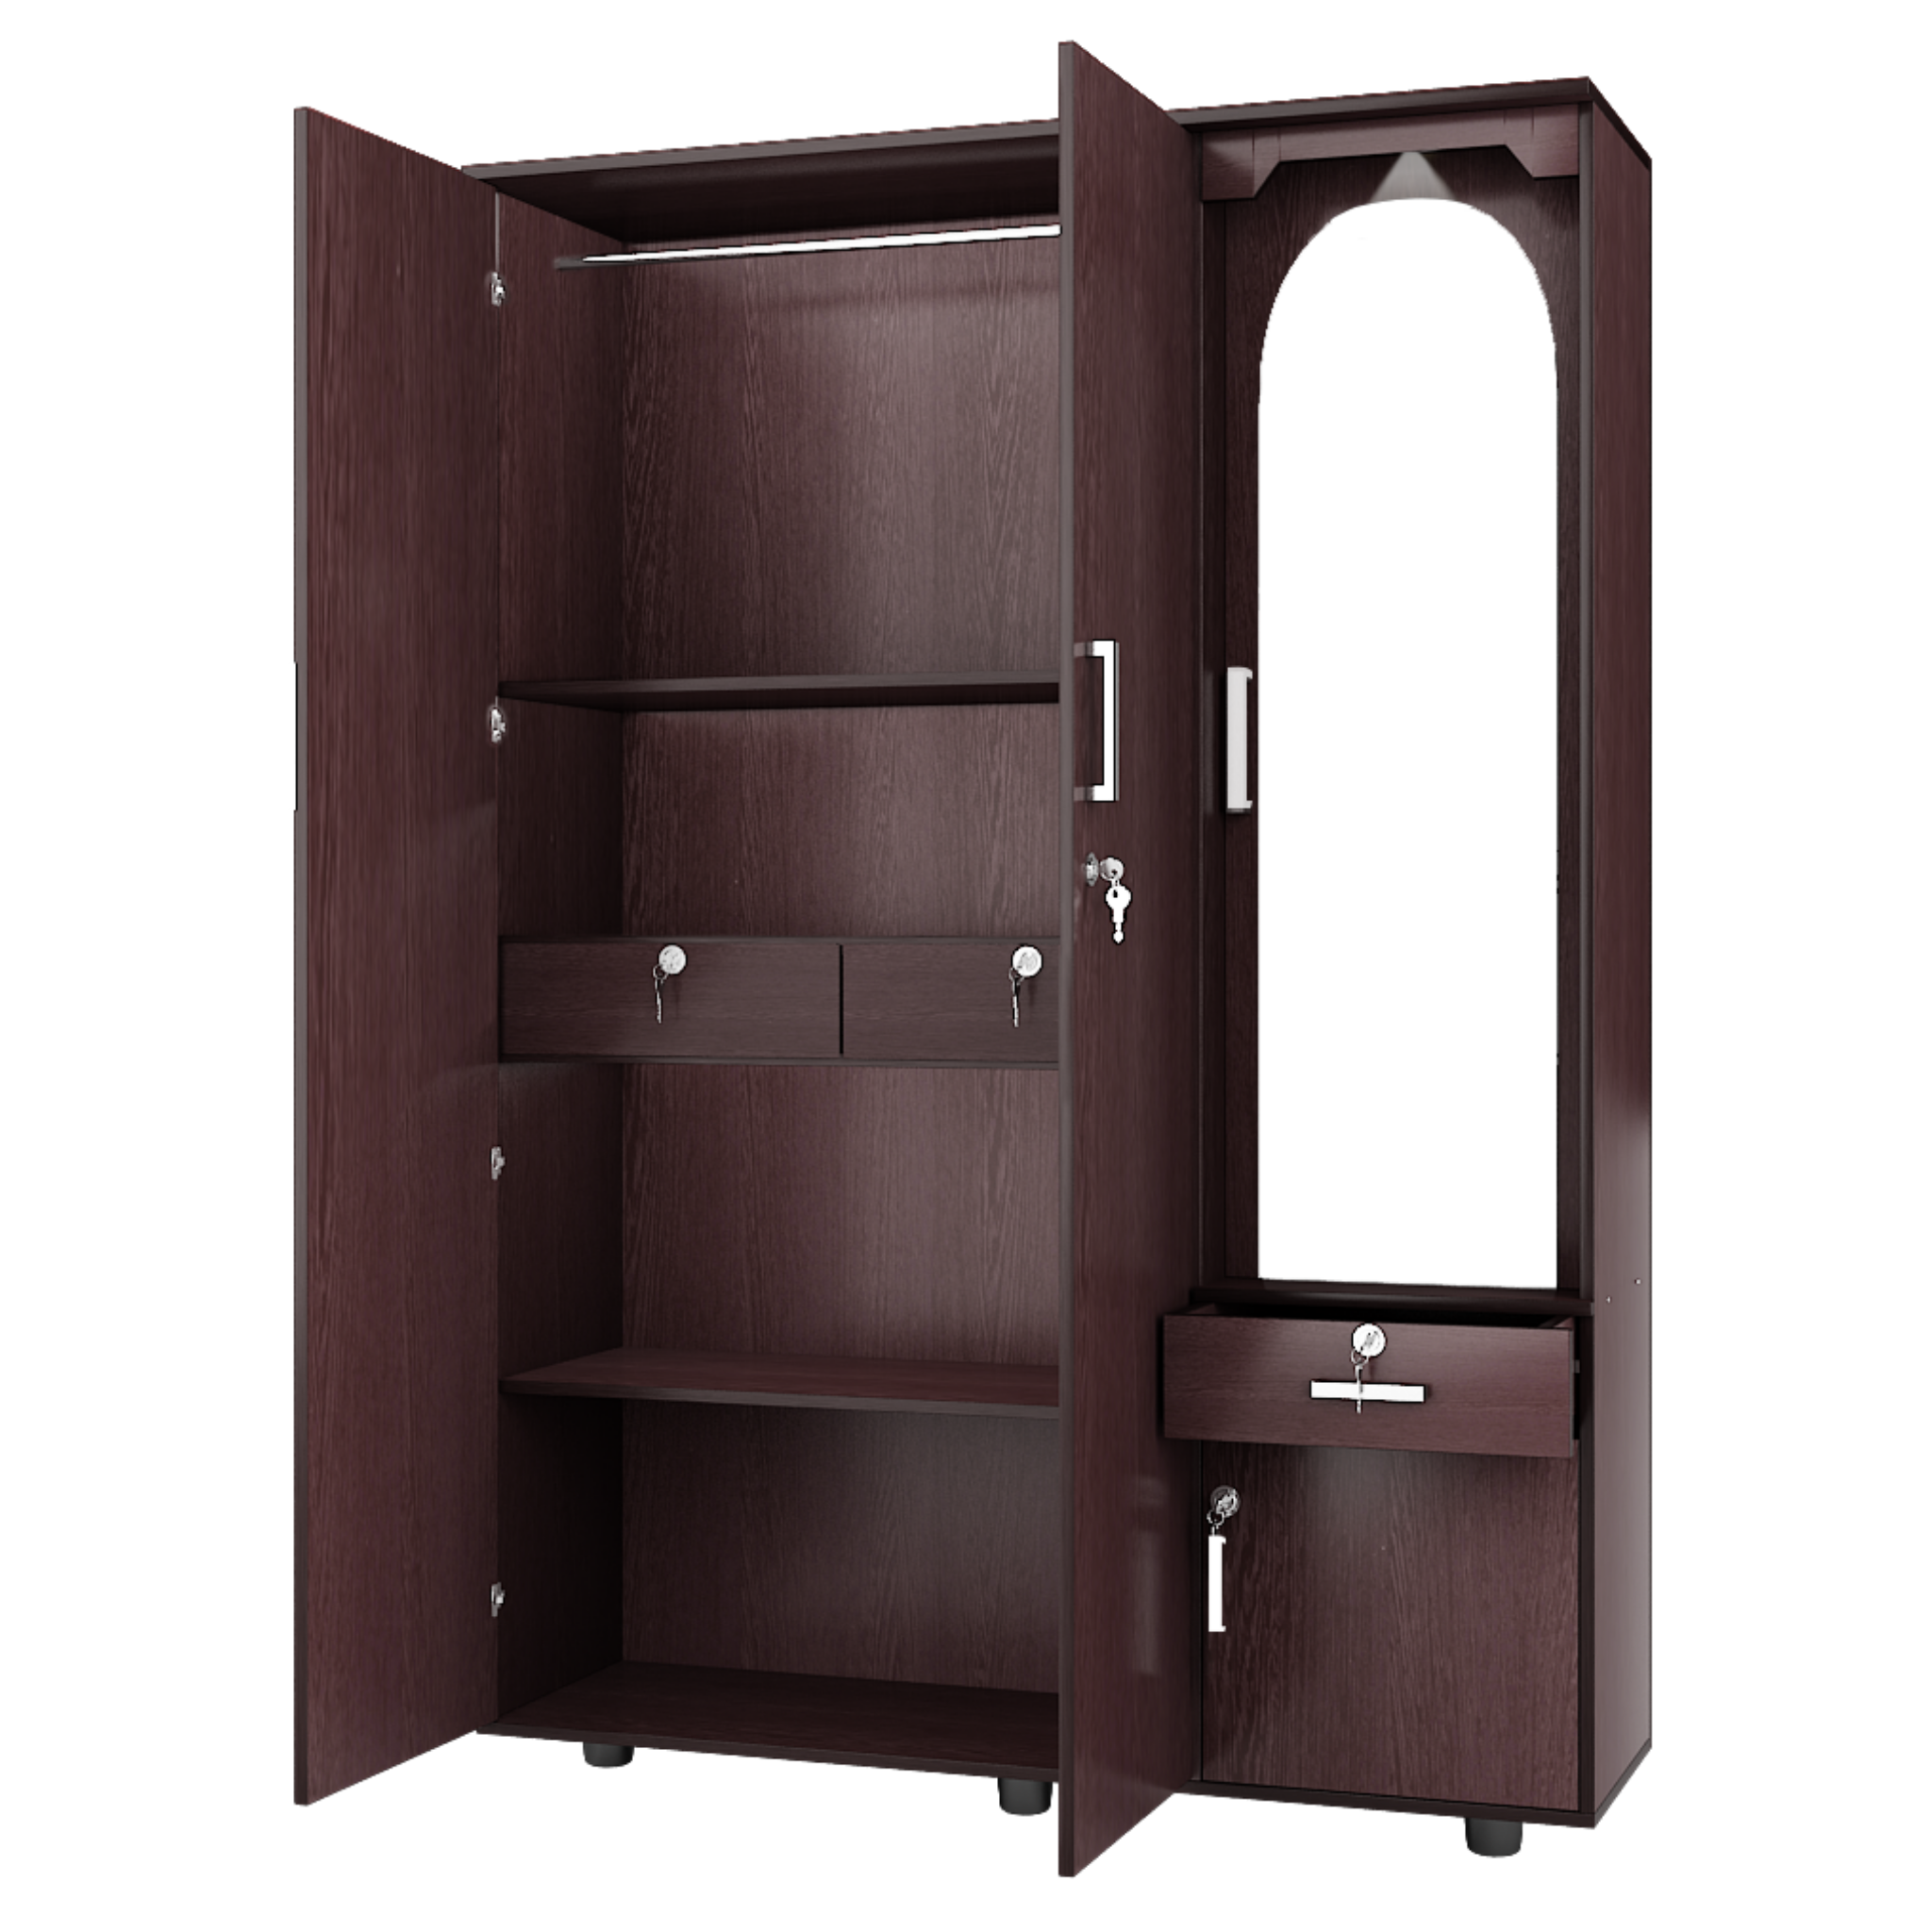 Super and Luxury Two Door Wardrobe with Dresser and Storage